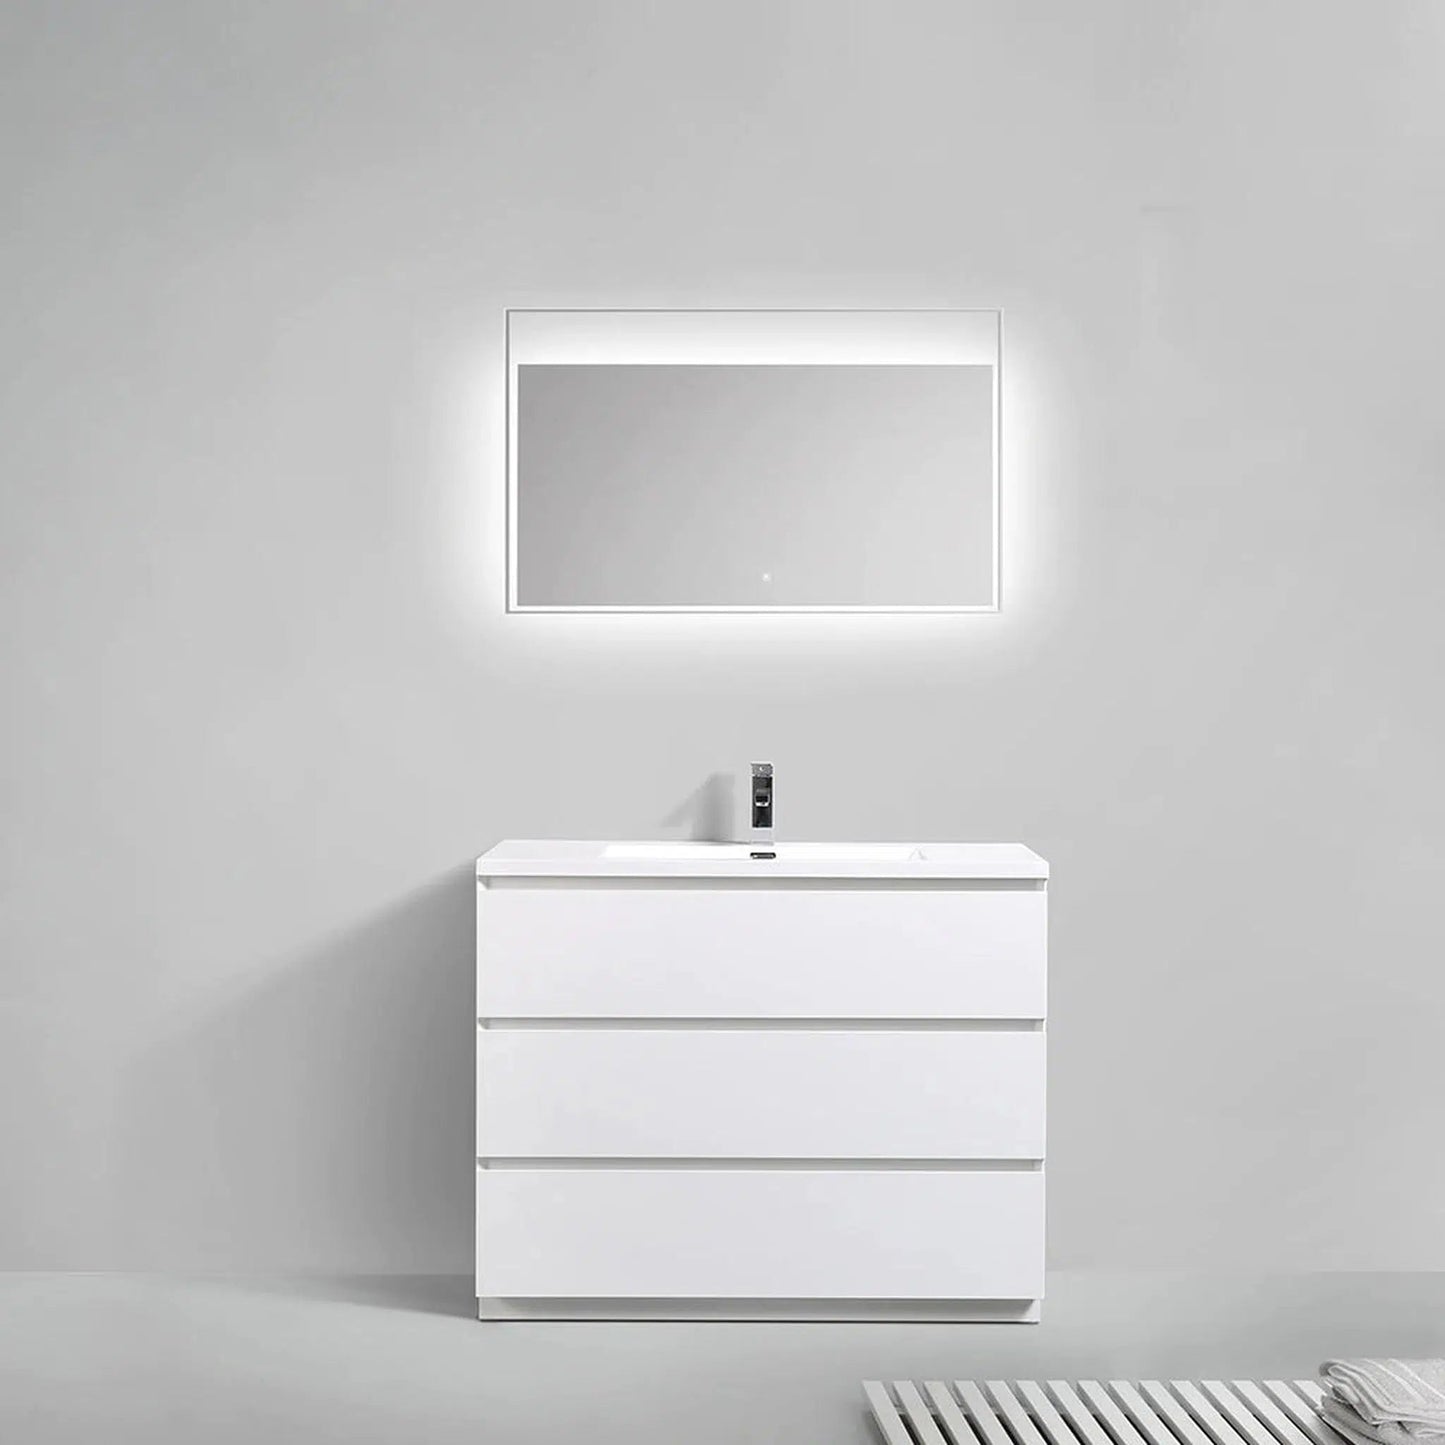 TONA Edison 42" White Freestanding Bathroom Vanity With Artificial Stone Integrated Top & Sink